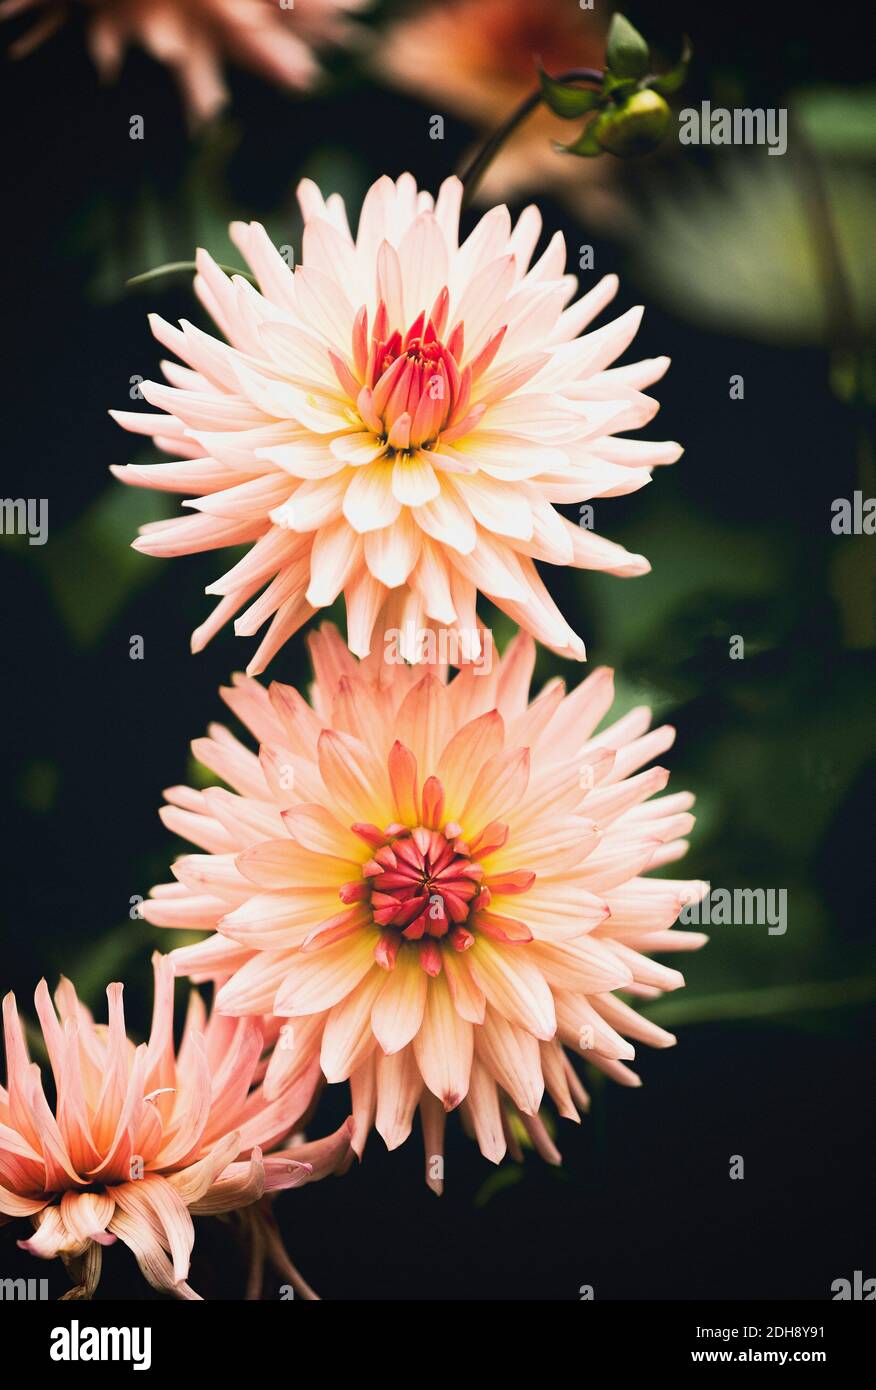 Dahlia, Pink coloured spikey flowers growing outdoor. Stock Photo